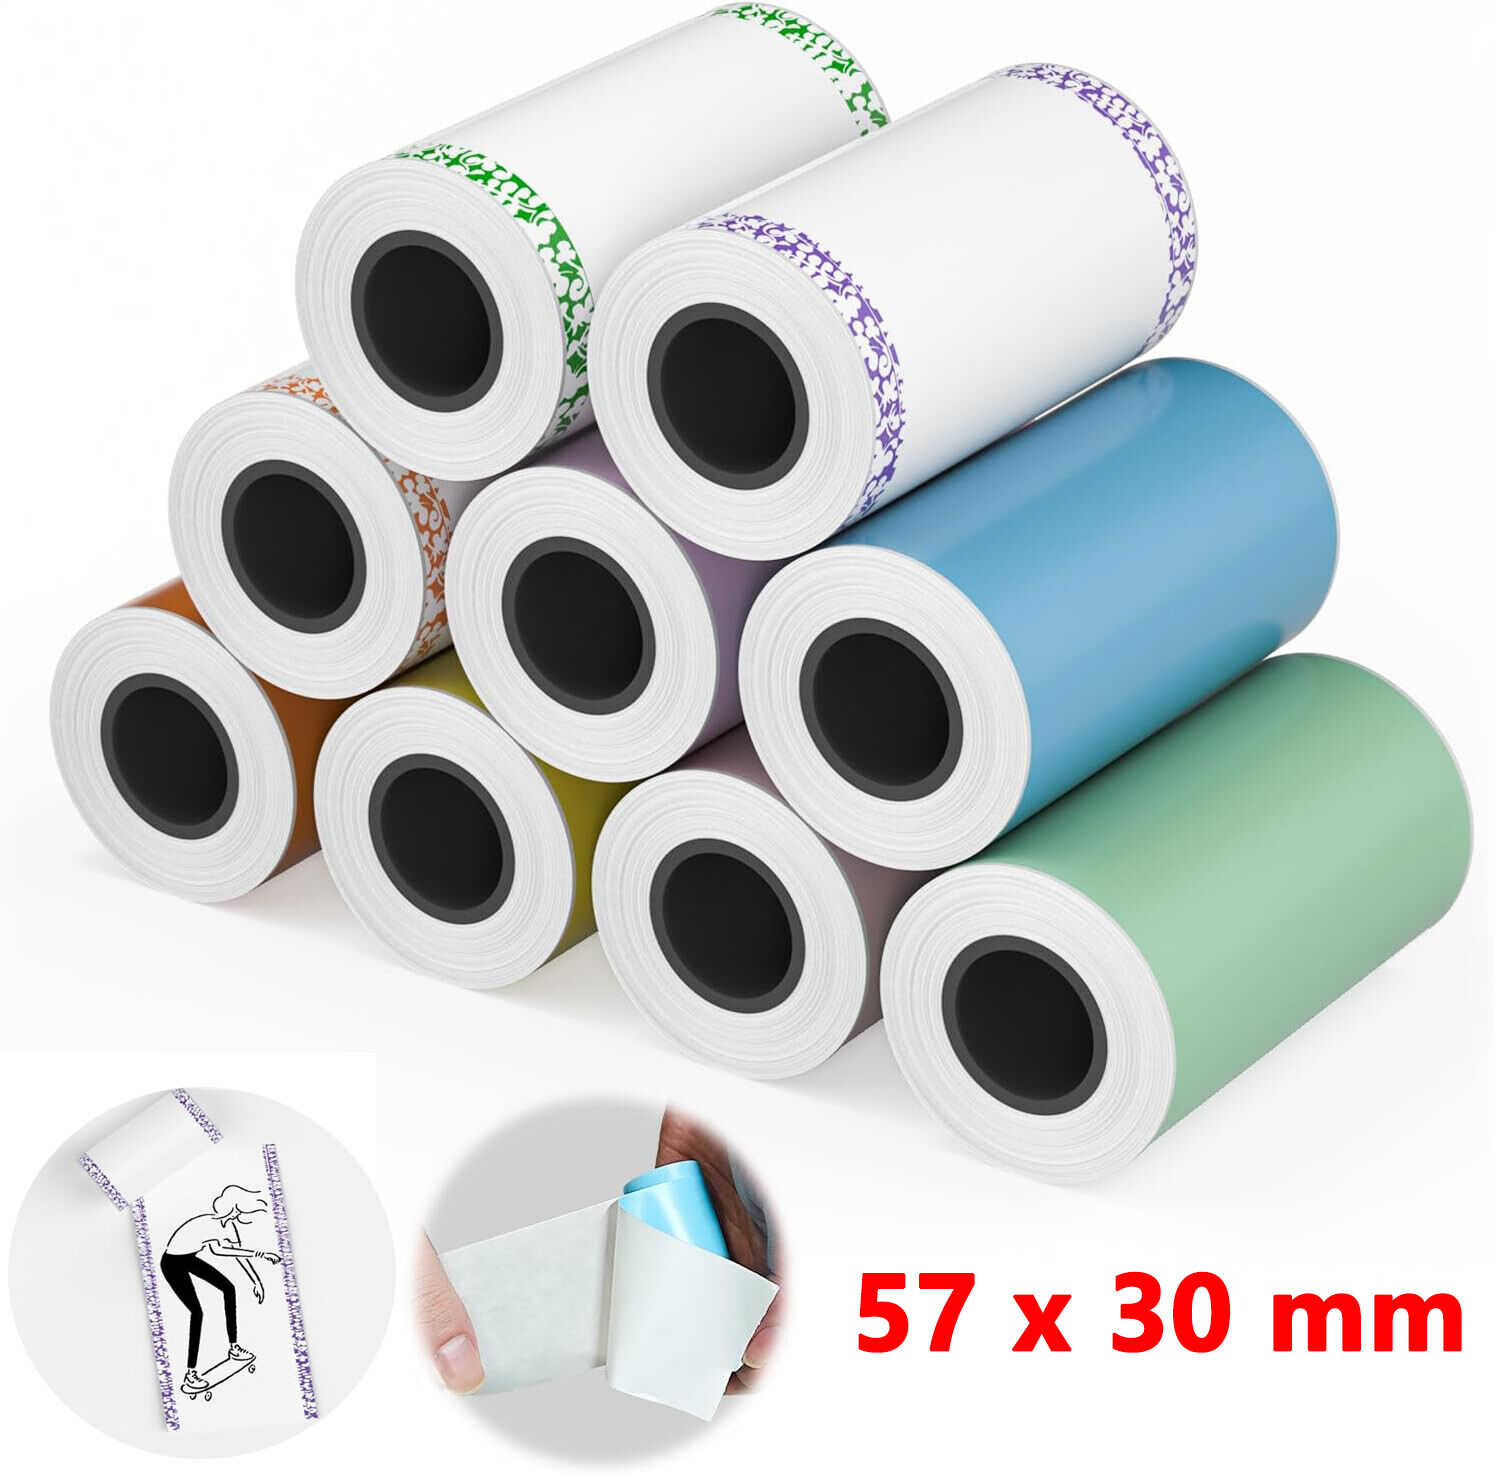 9-36 Rolls Self-Adhesive Thermal Printing Stickers 57x30mm Photo Thermal Paper